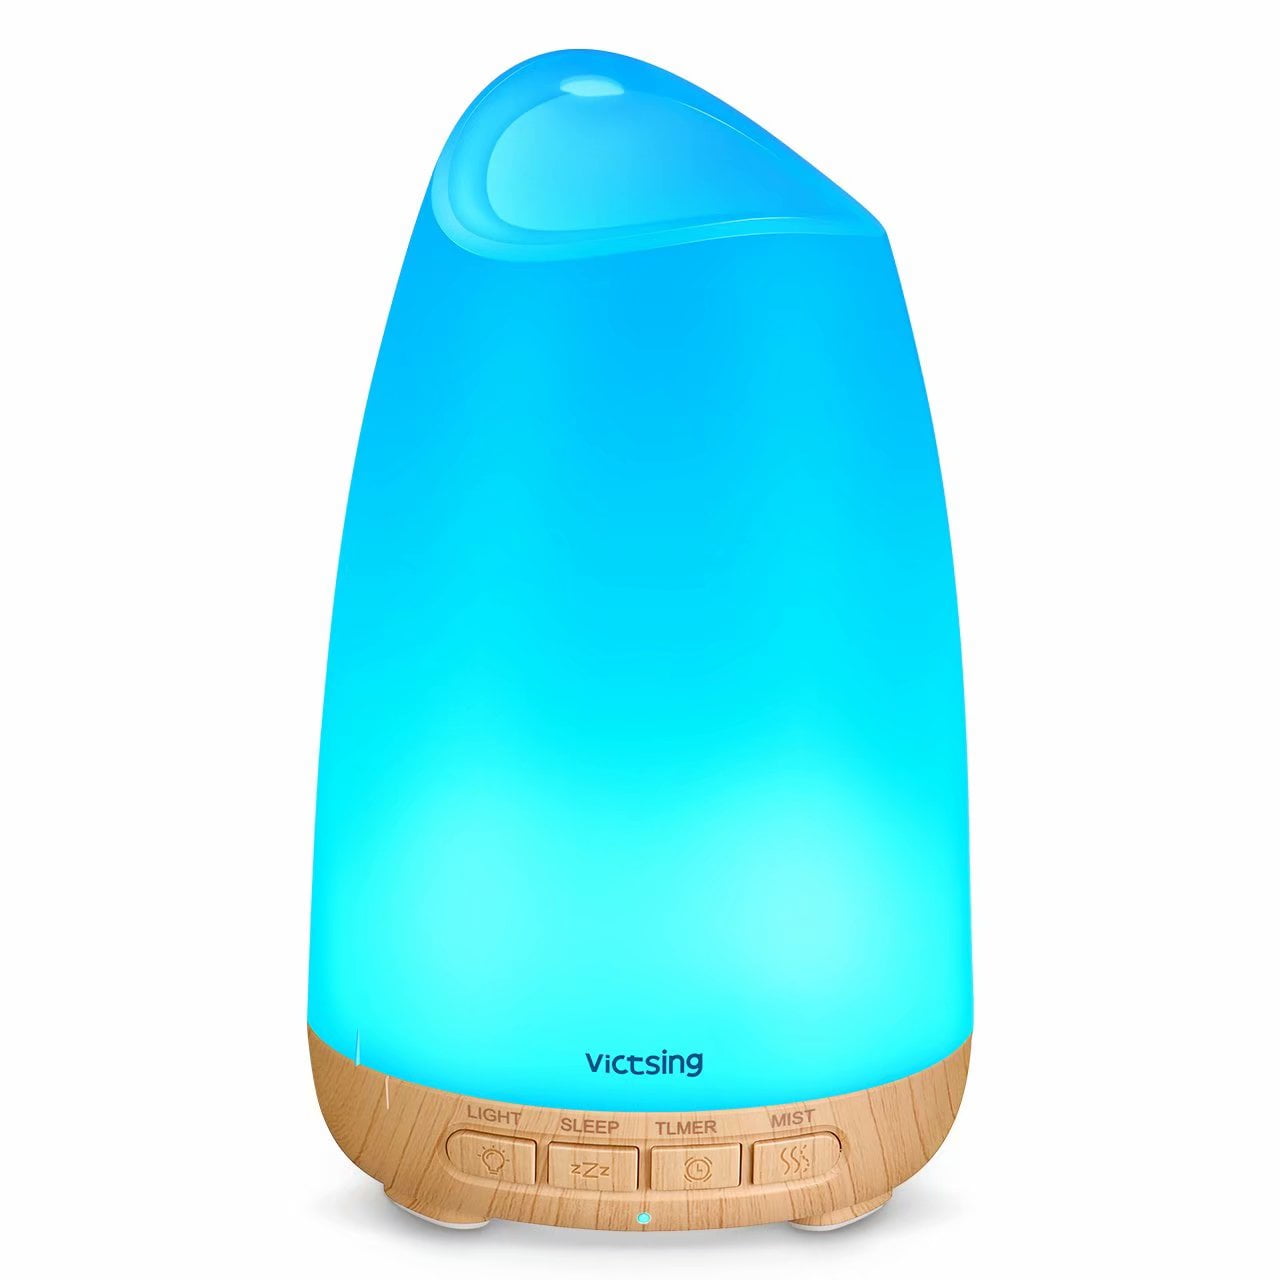 VicTsing 150ml Essential Oil Diffuser with Noise Reduction Design